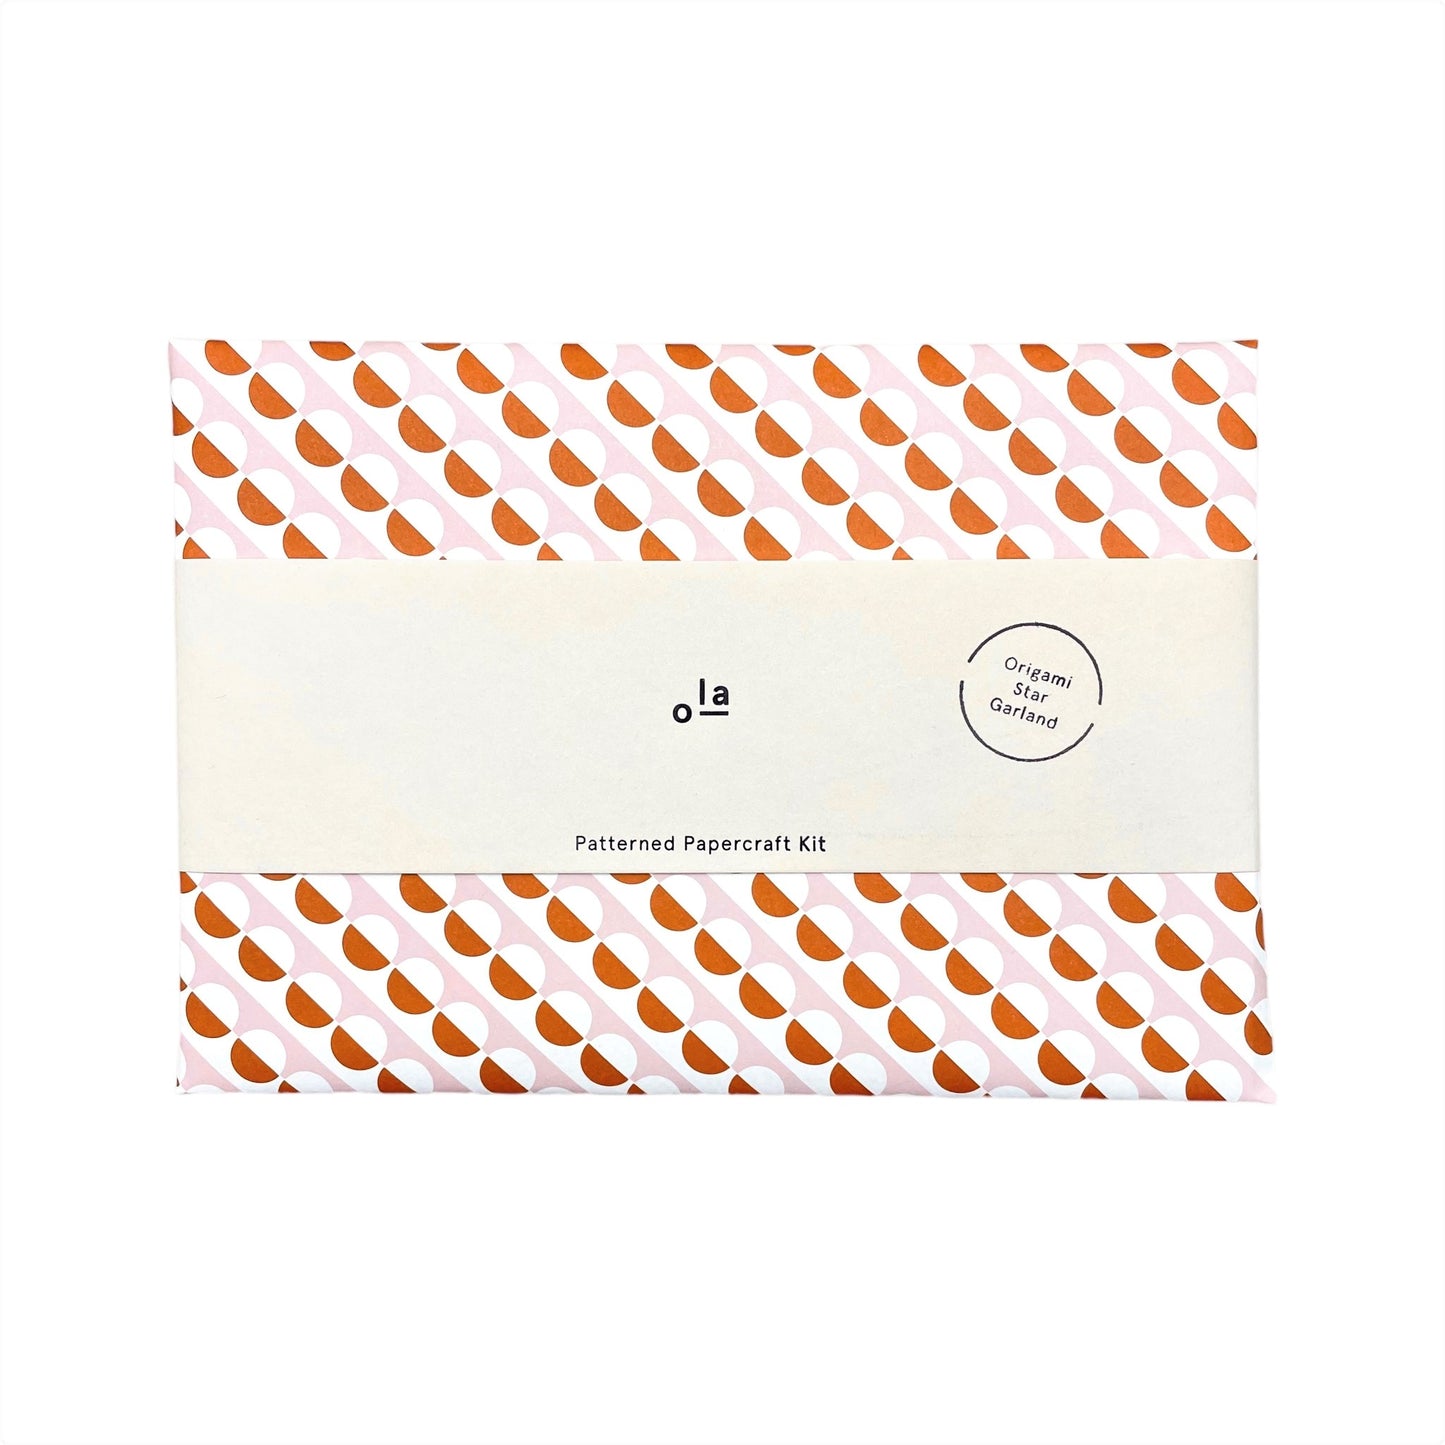 A garland of small paper origami patterned stars "lucky stars" , pictured is the outer pink and orange envelope packaging with branded belly band